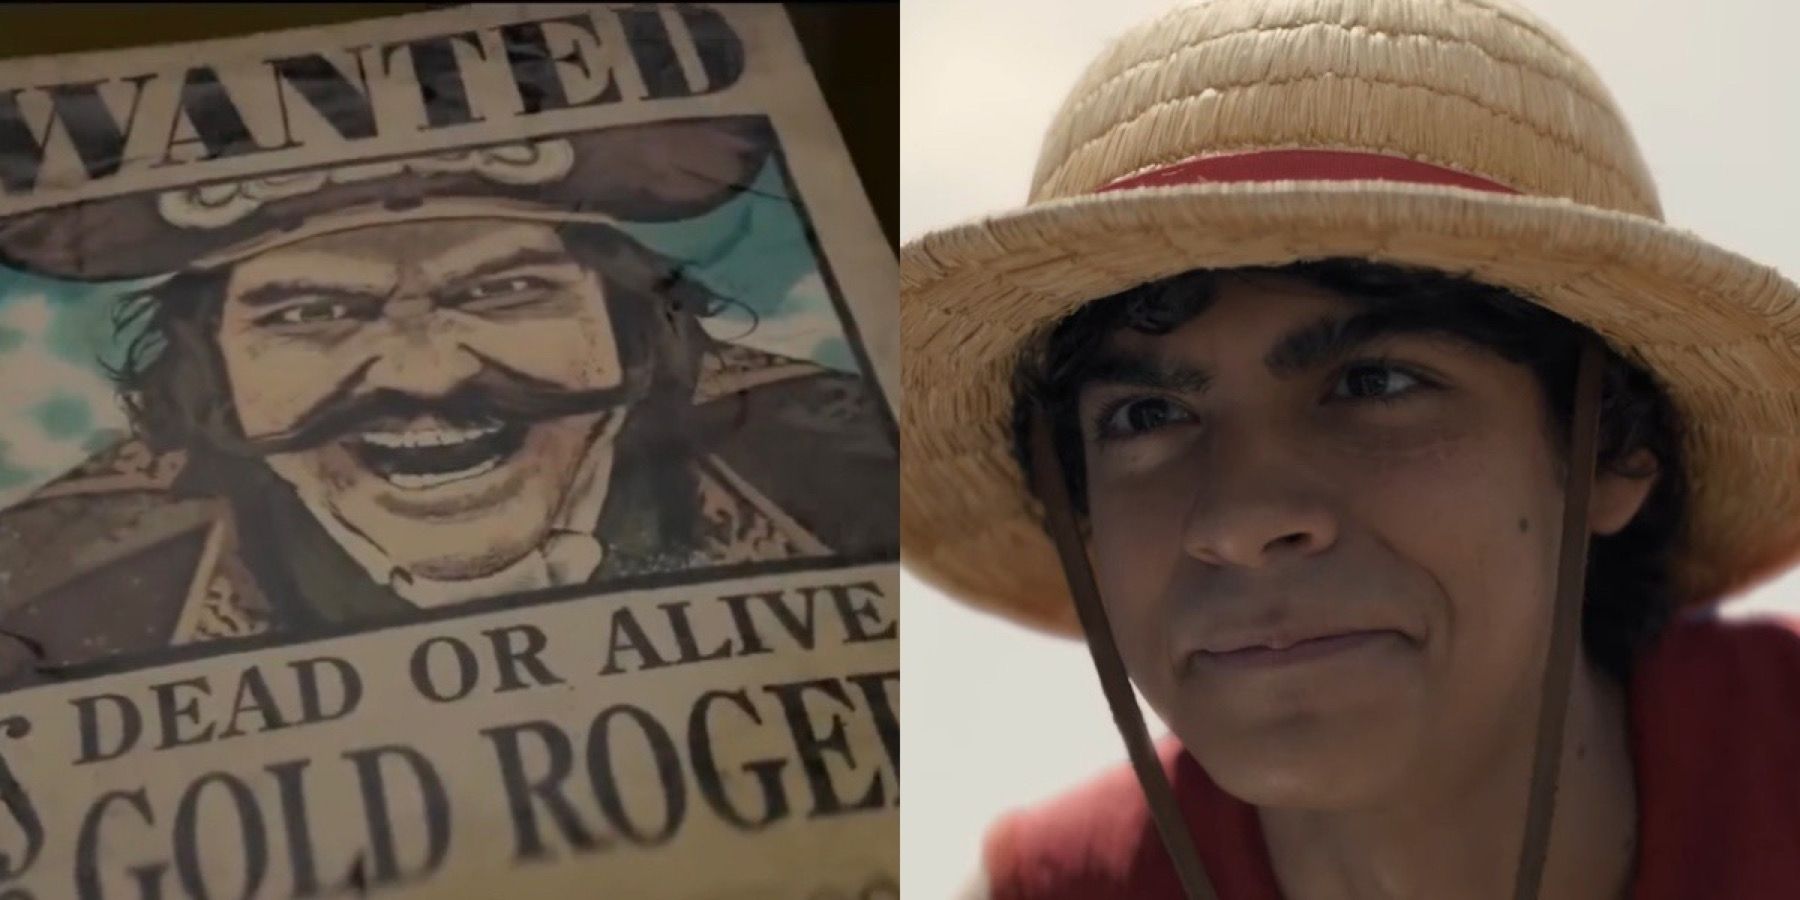 gol d roger luffy one piece live action